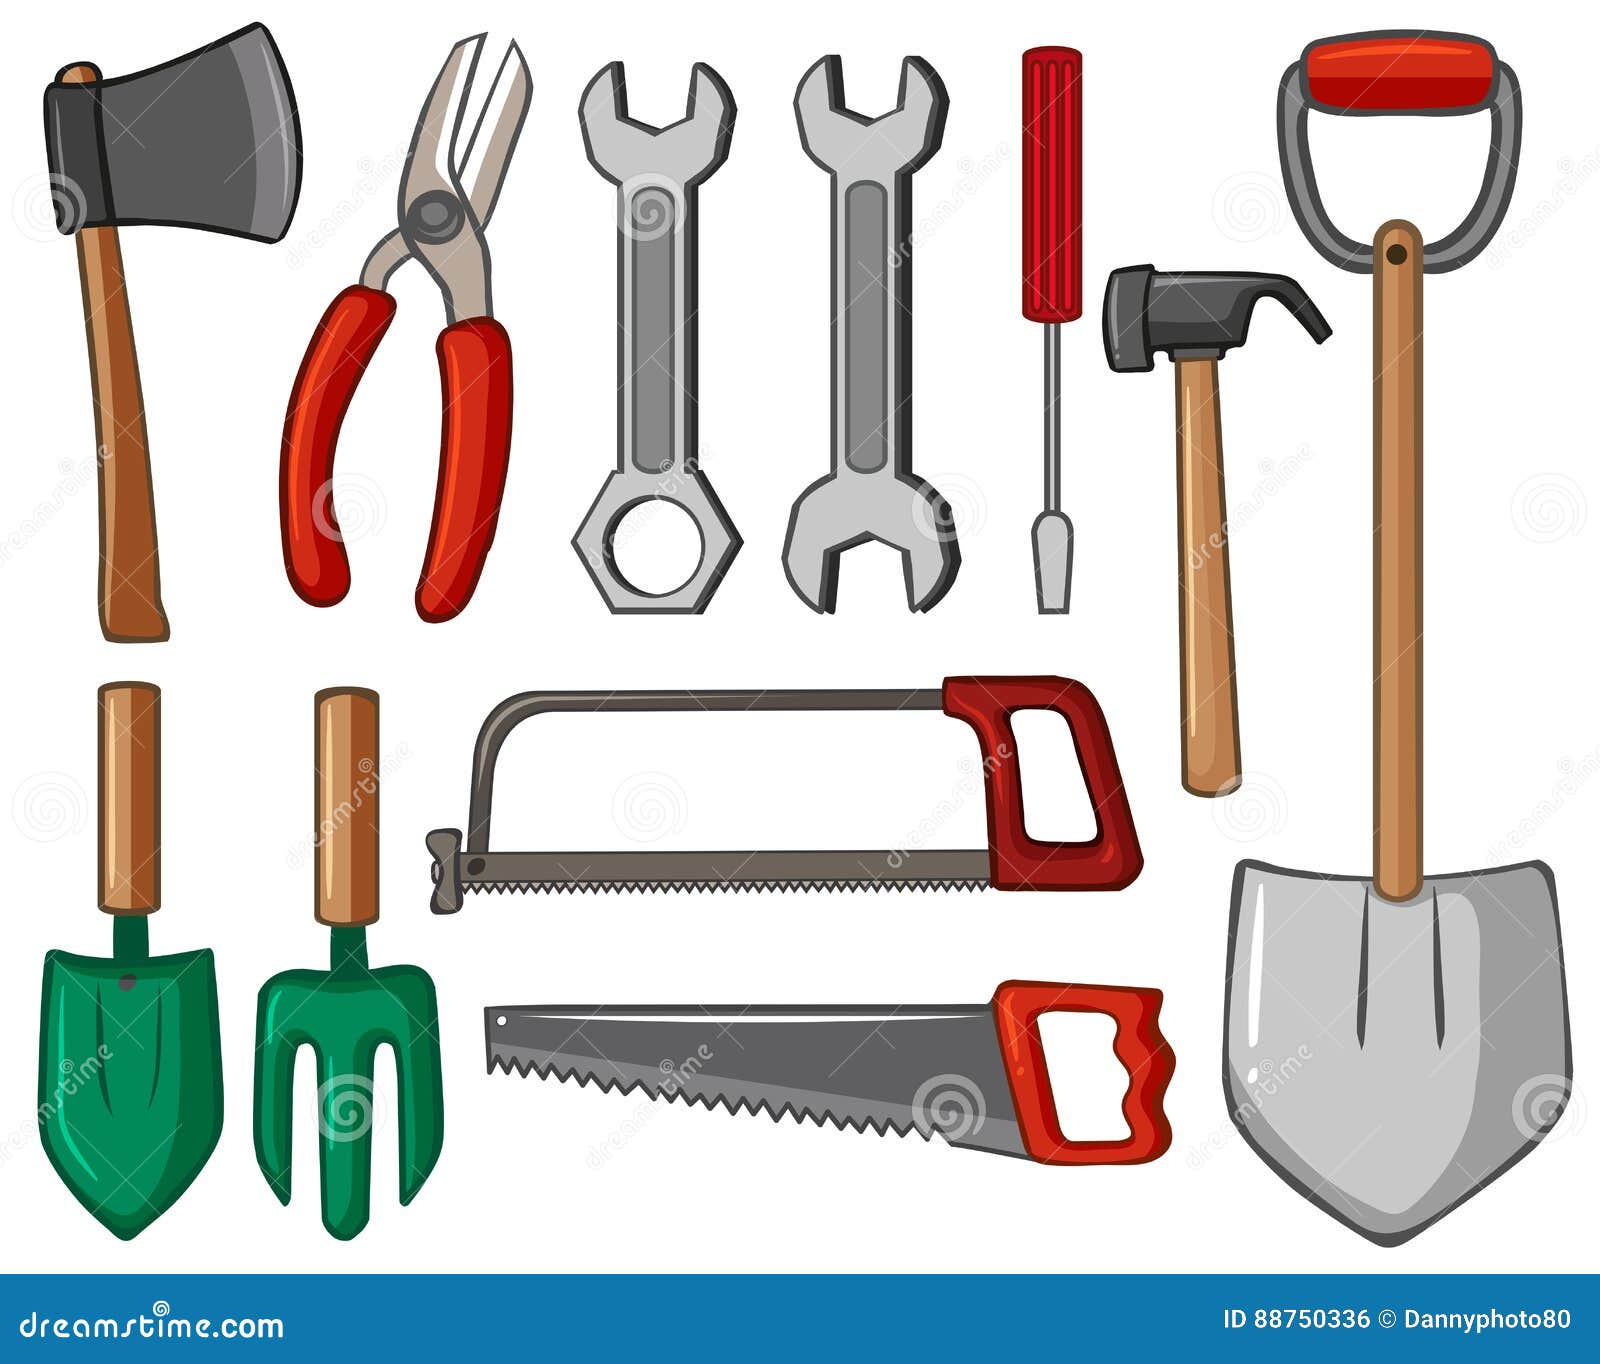 free clipart hand tools - photo #44